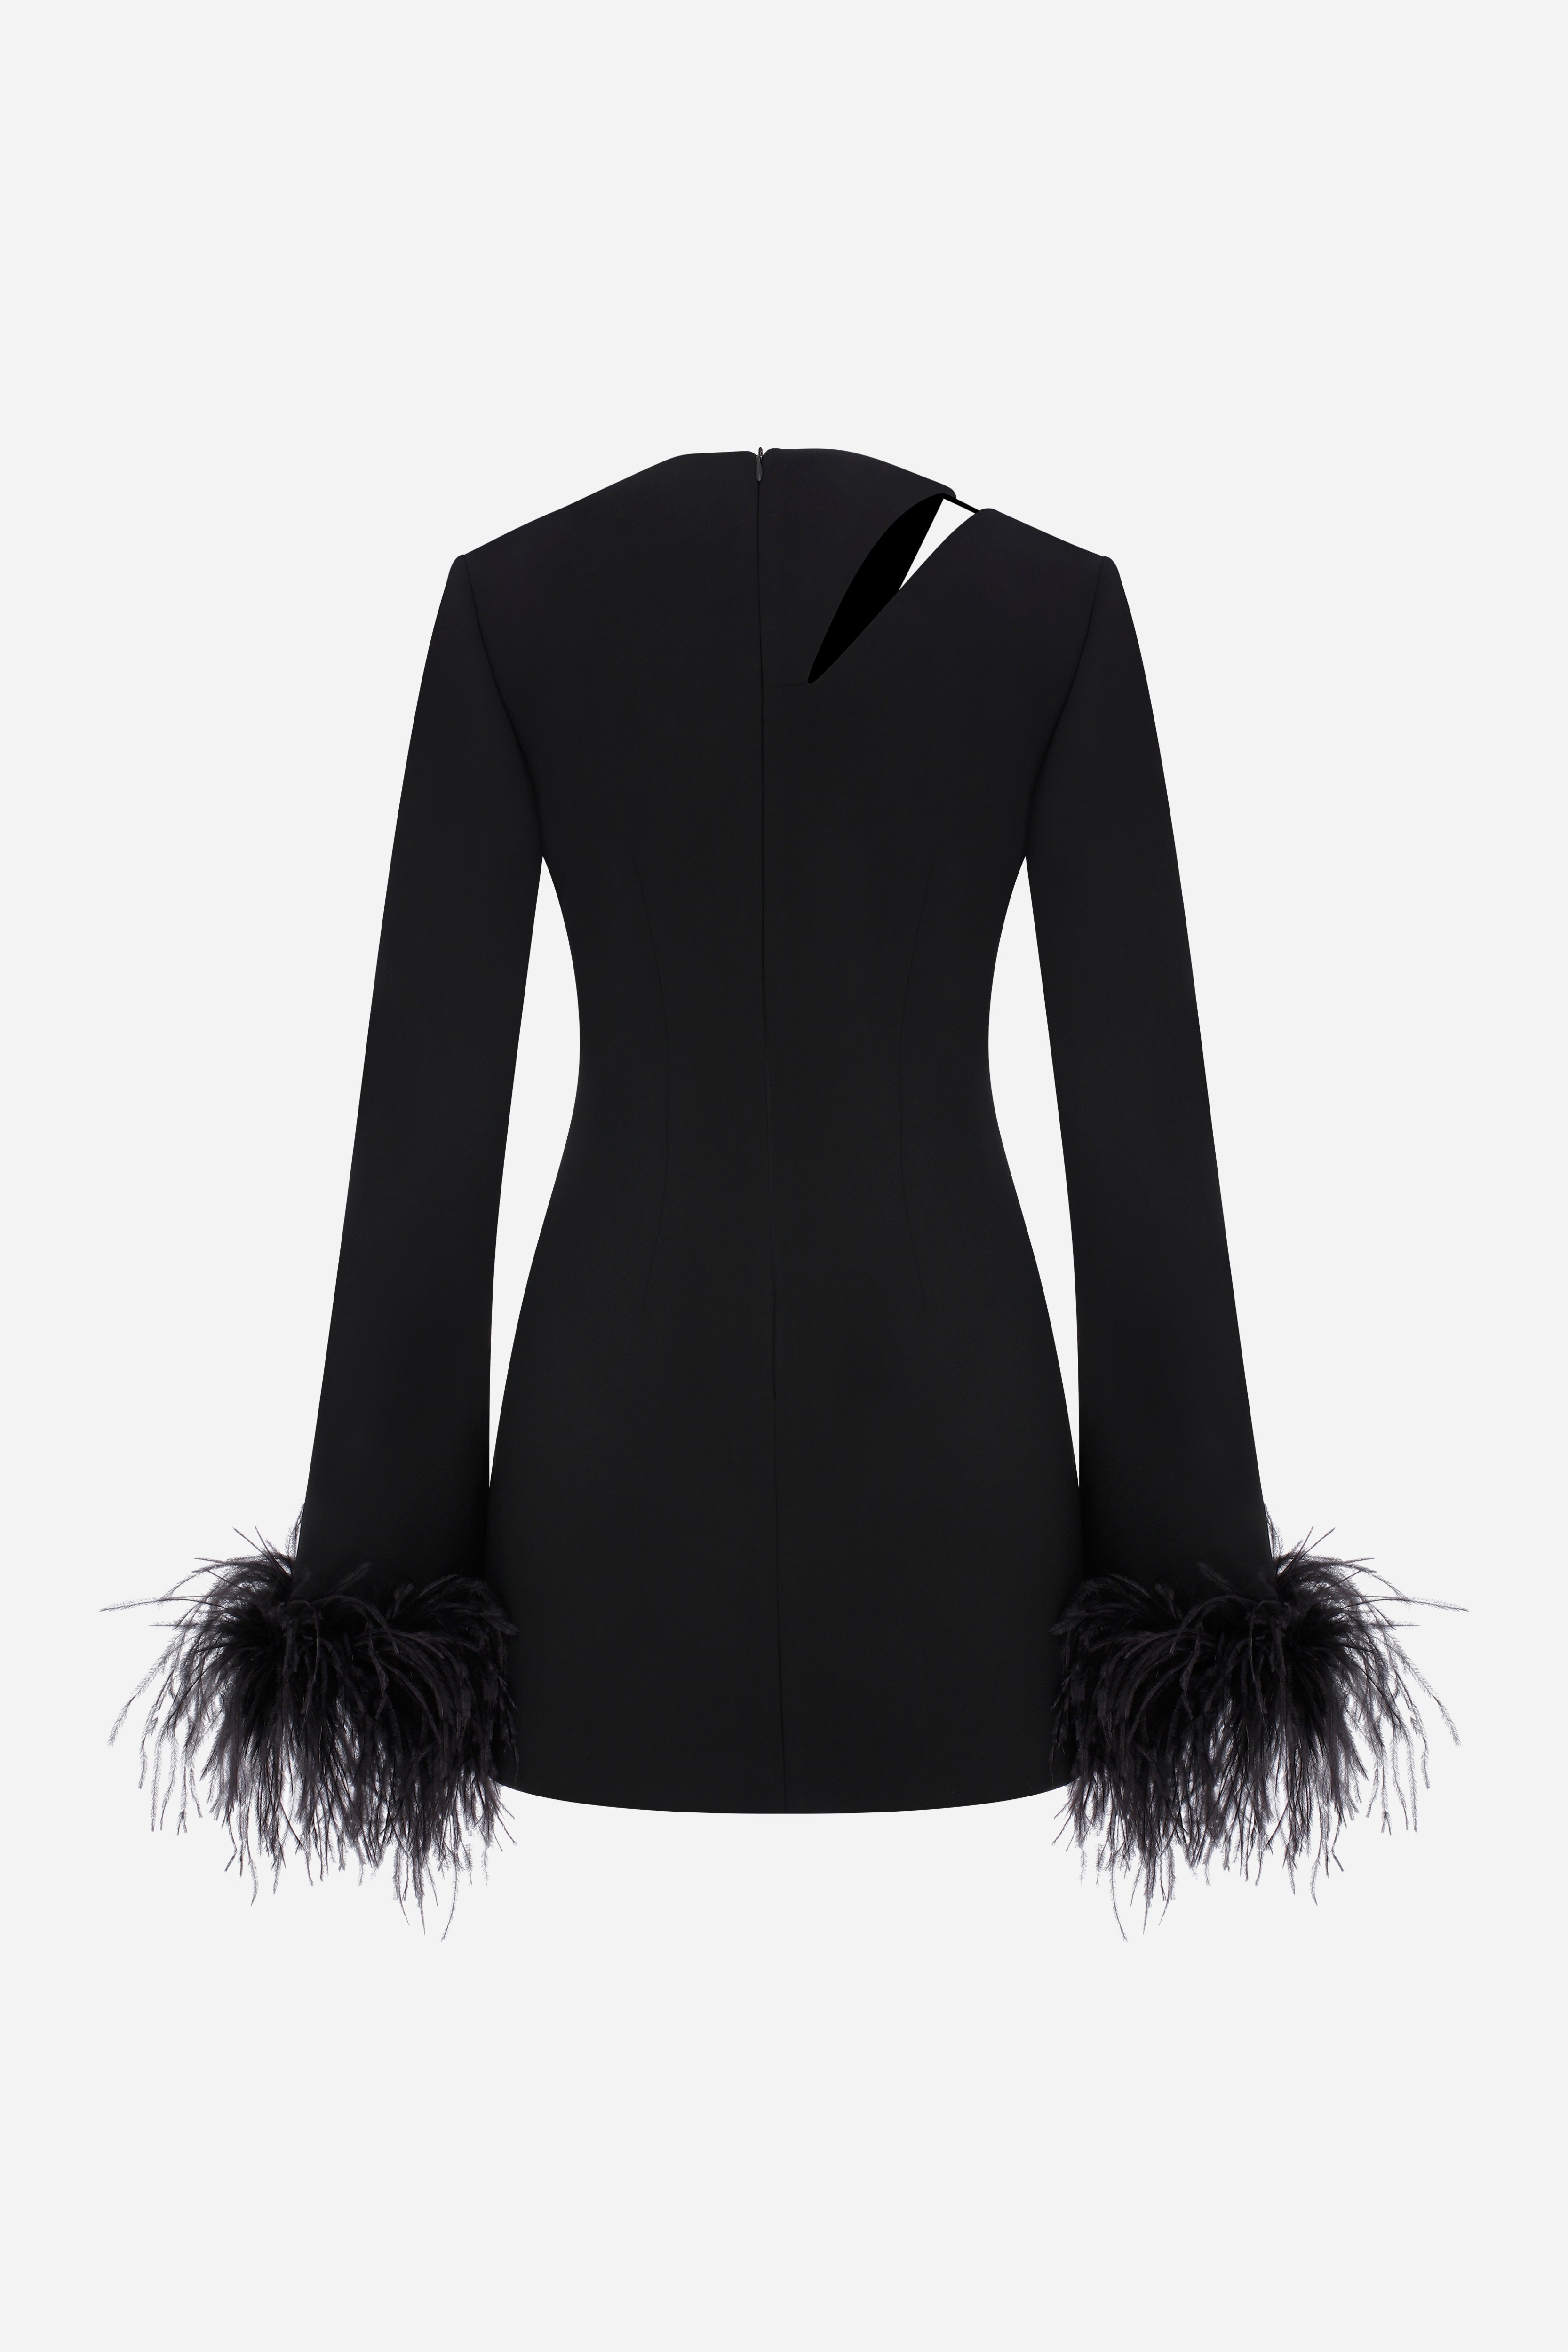 AUDREY - MINI DRESS WITH CUTOUT DETAILS ON SHOULDER AND FEATHER TRIM ON SLEEVES